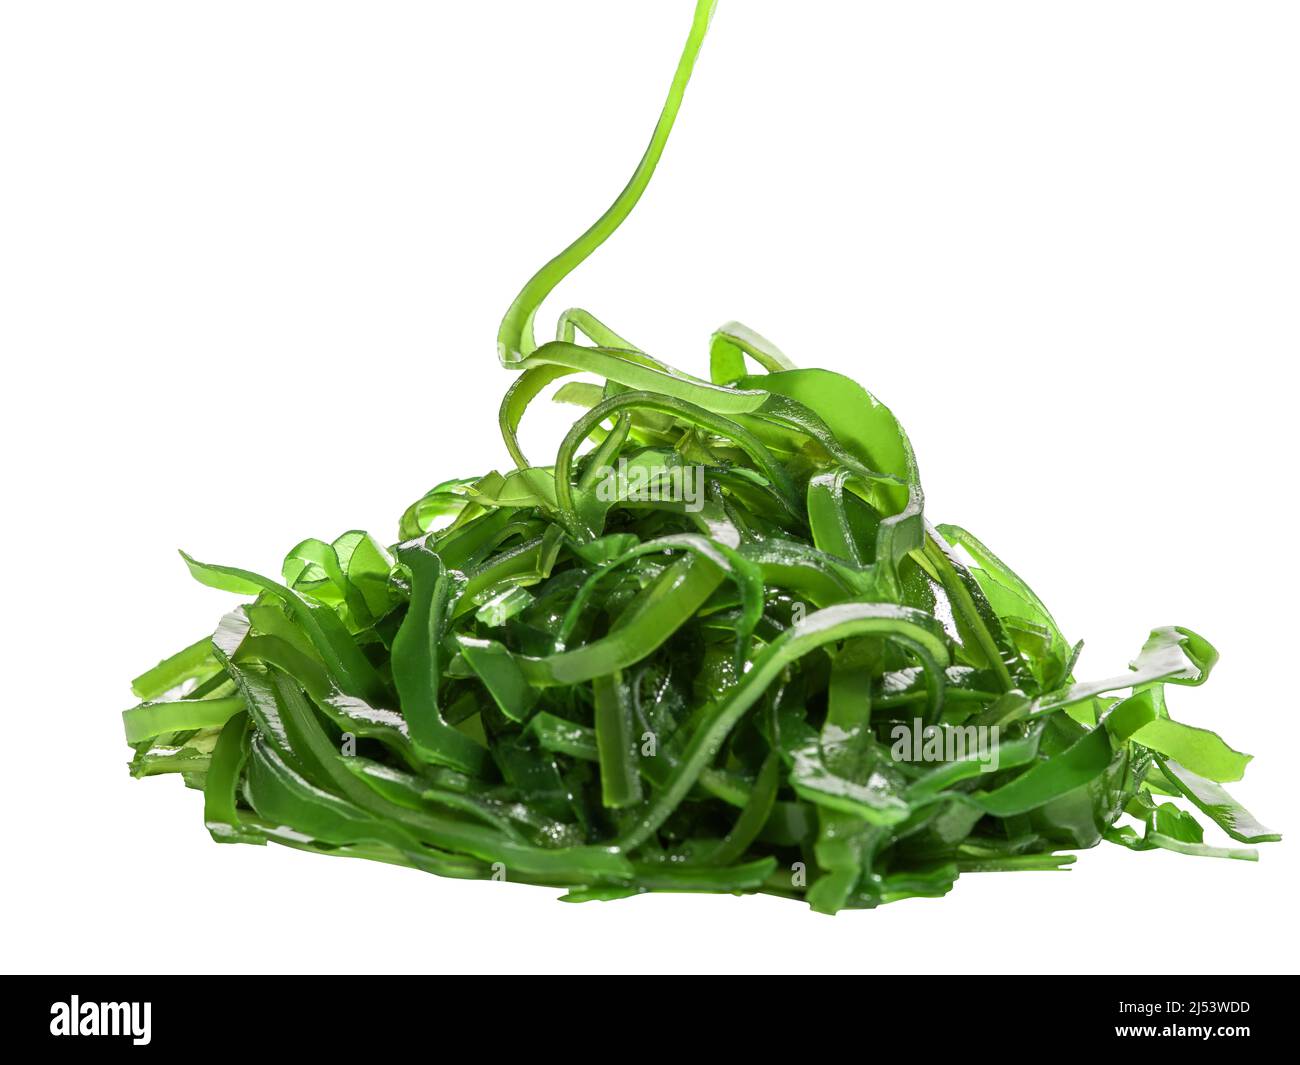 Heap of pickled wakame seaweed isolated on white background Stock Photo